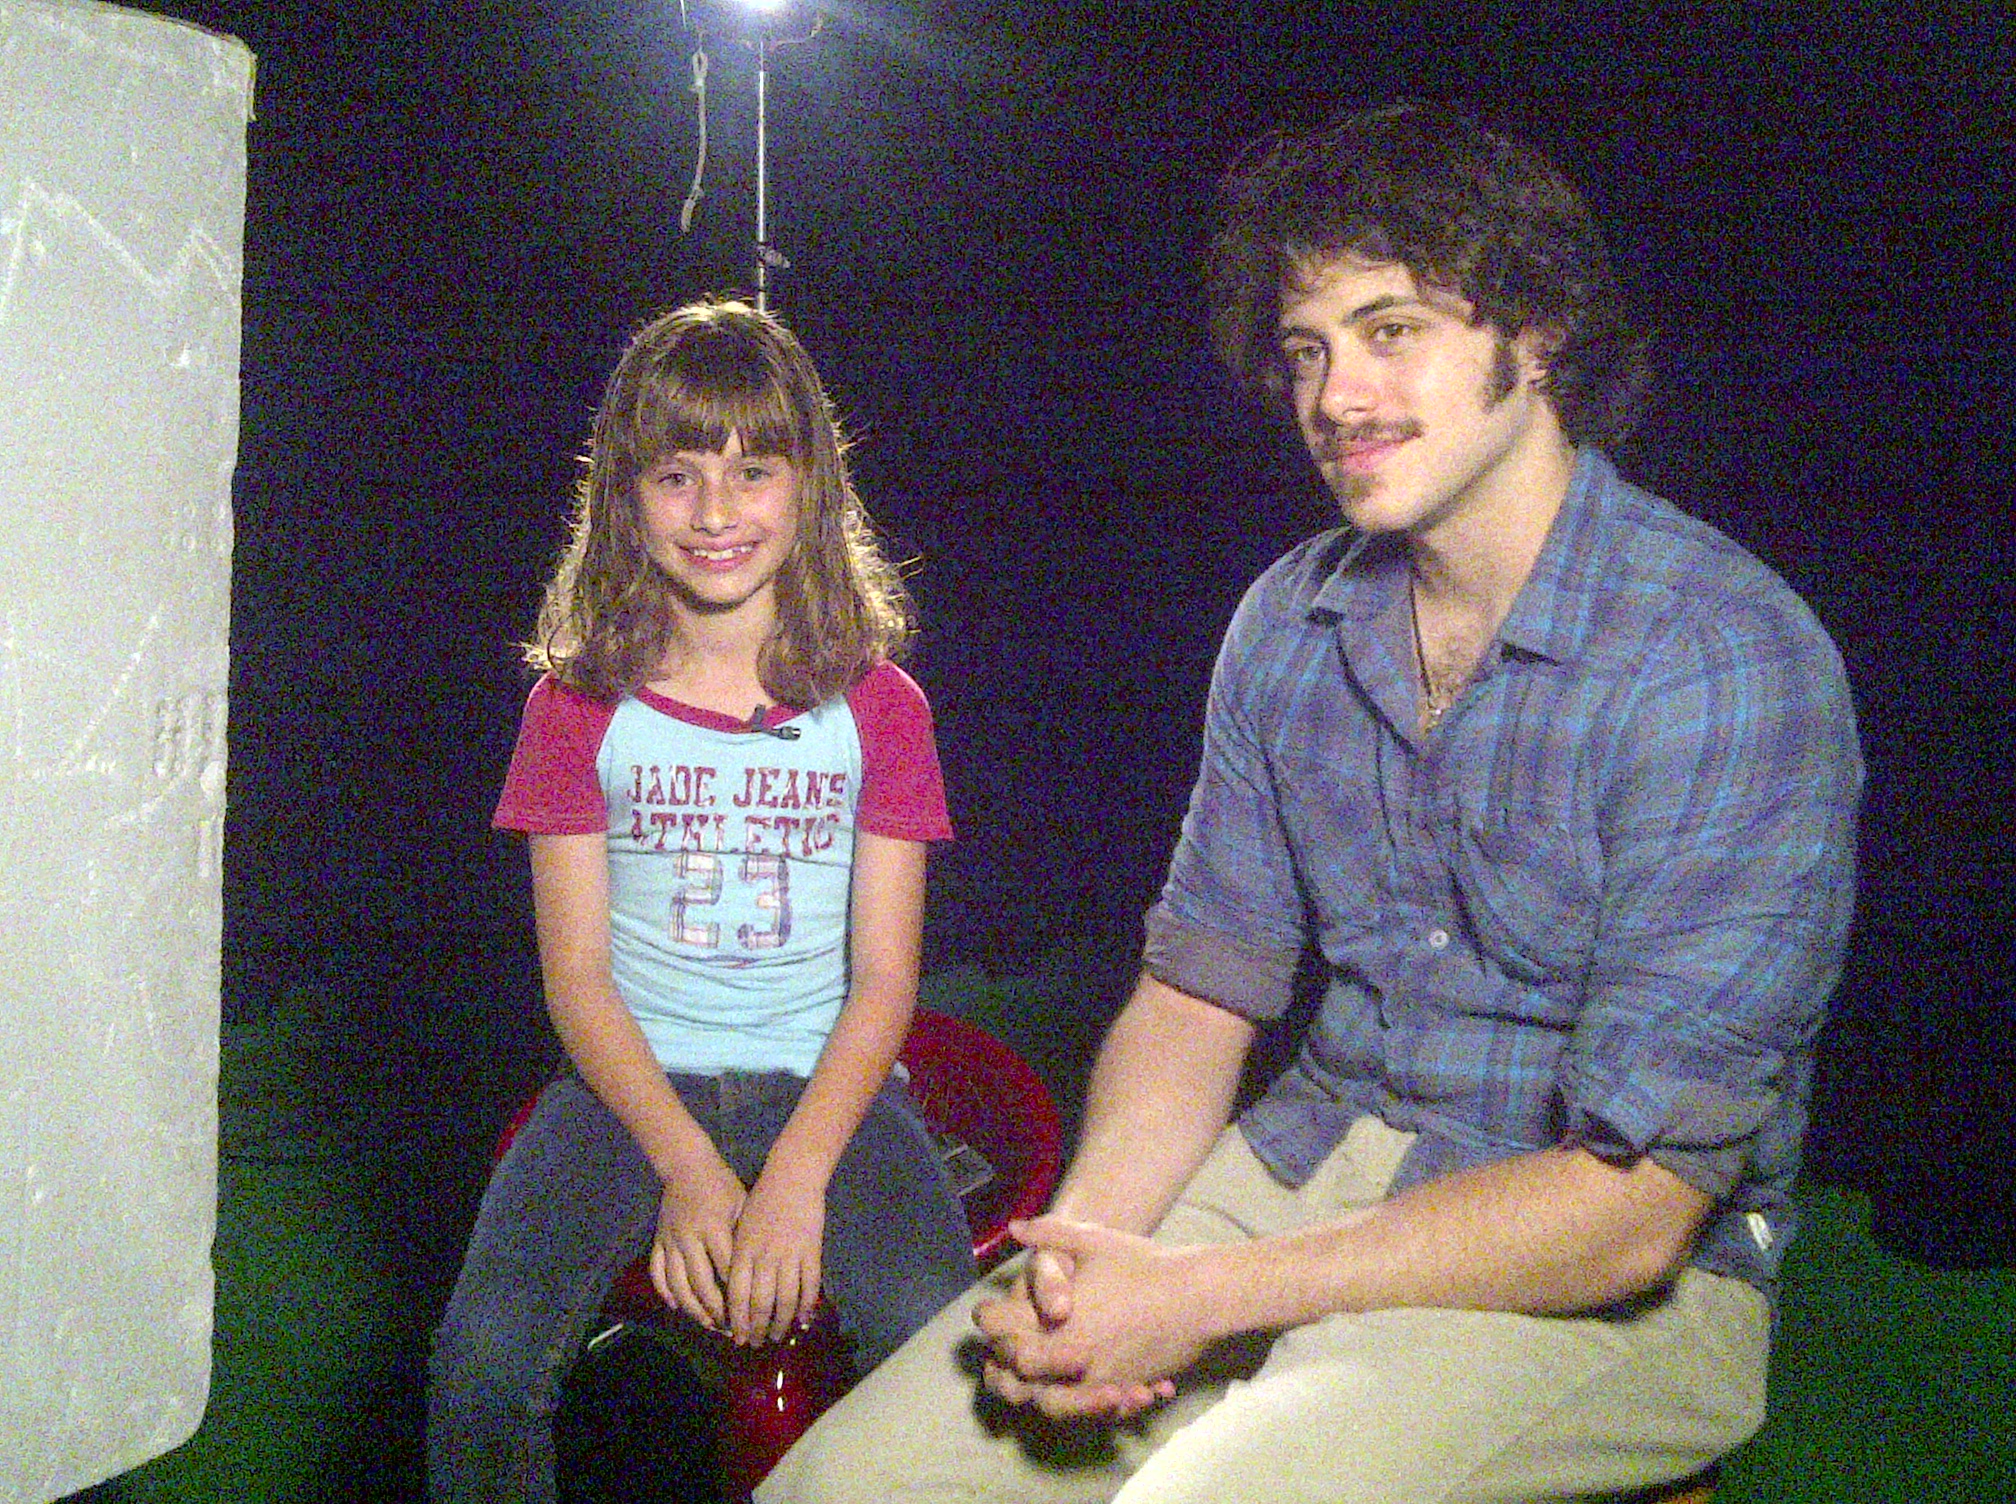 Sydney with director Noah DeBonis during an interview for the film 